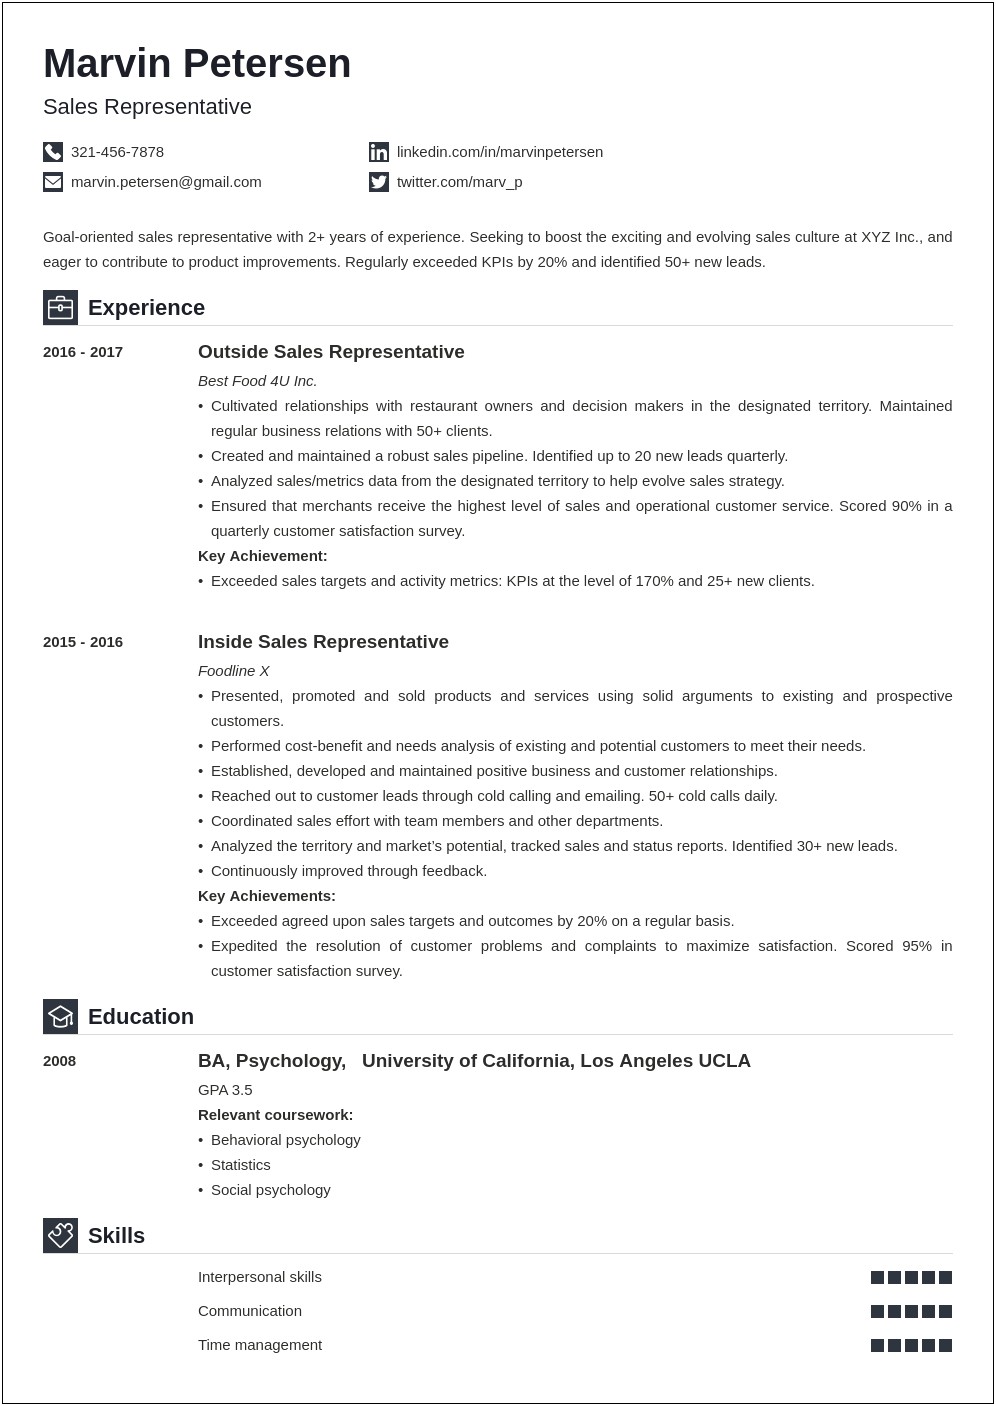 Resume Profile Summary For Sales And Marketing